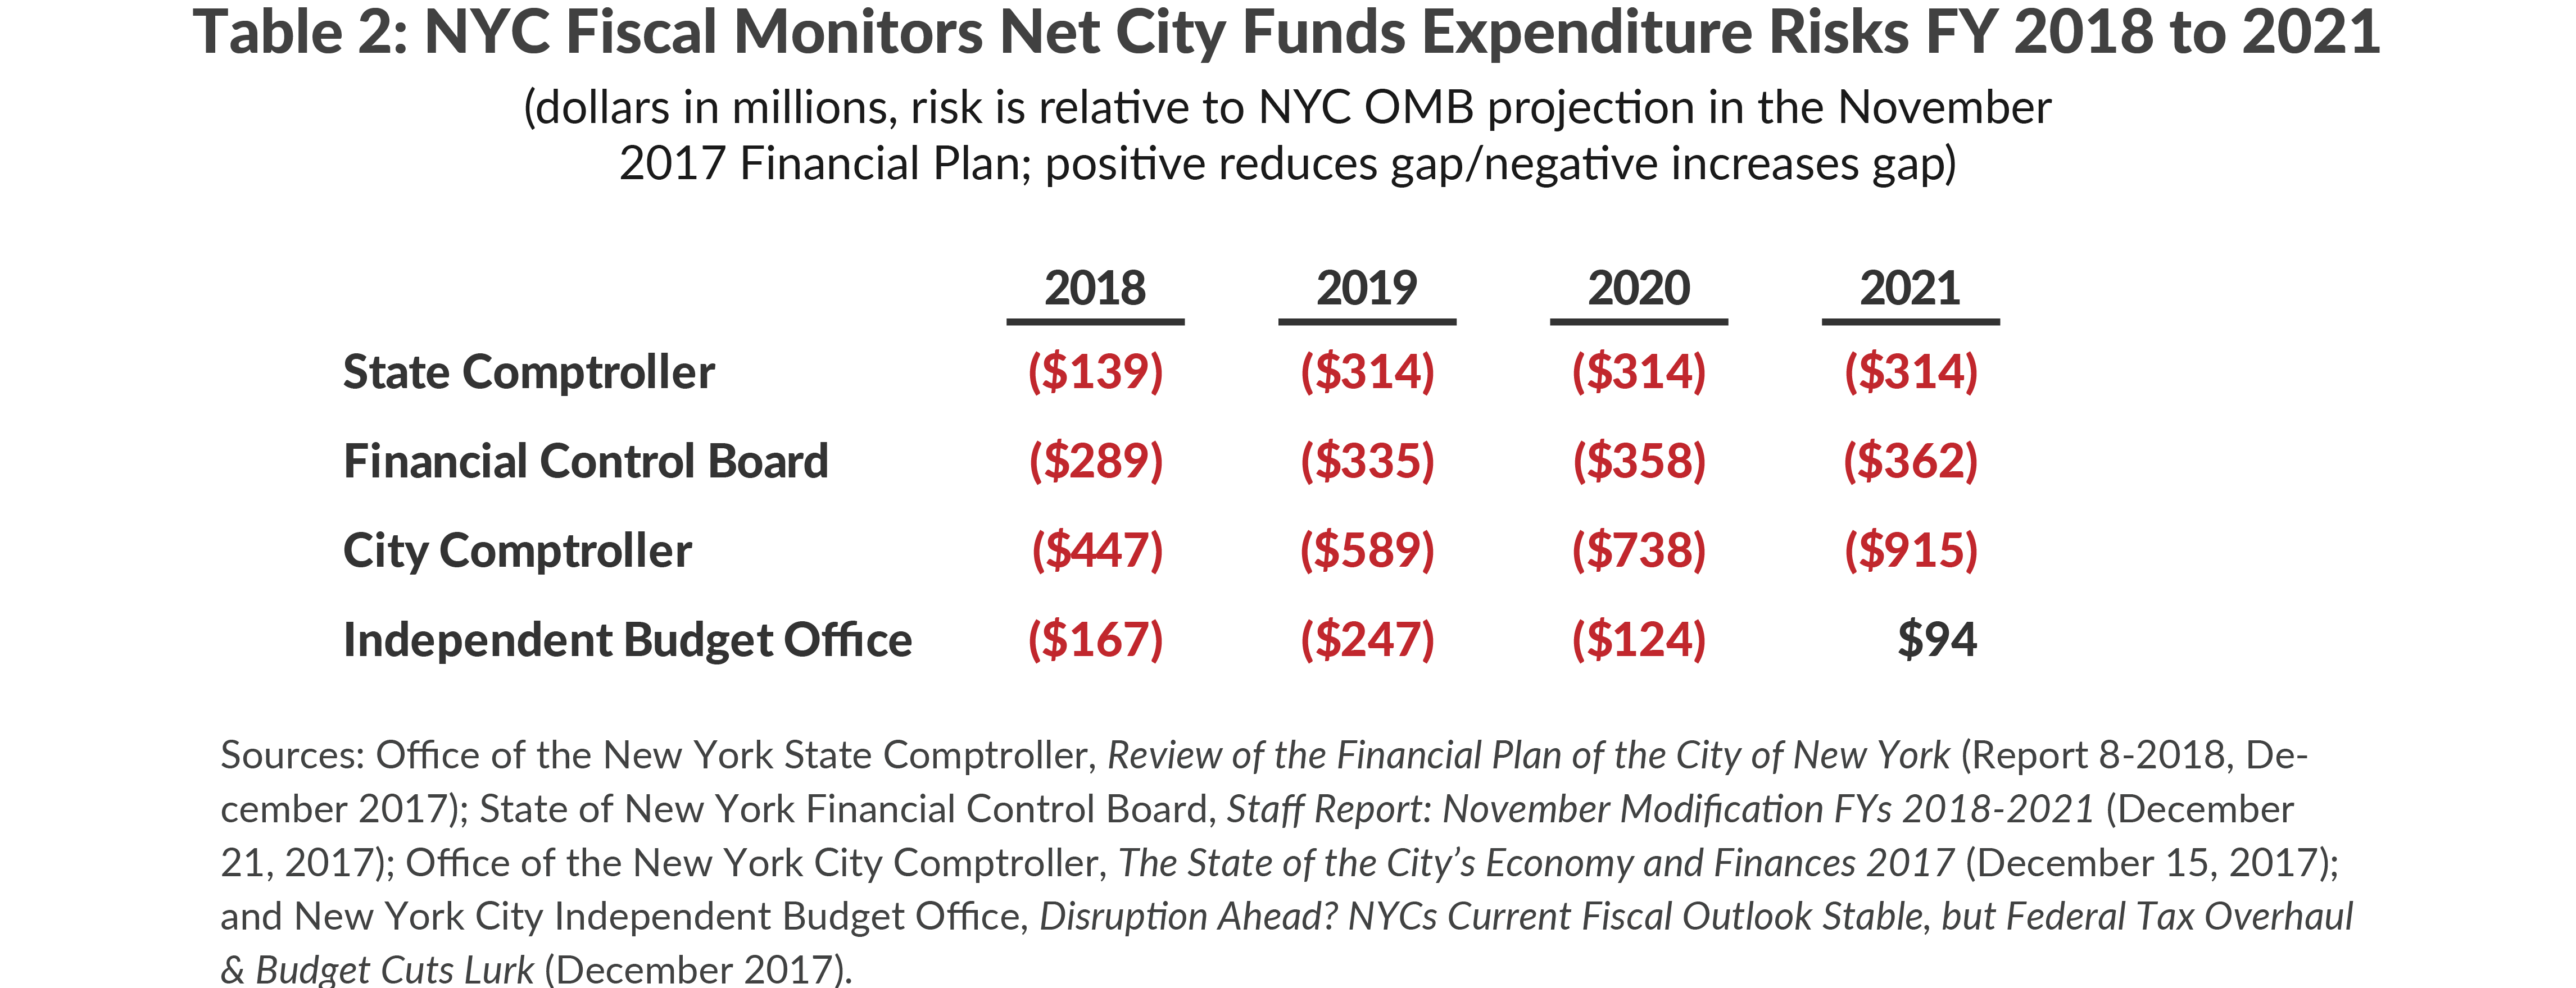 Table 2: NYC Fiscal Monitors Net City Funds Expenditure Risks FY 2018 to 2021